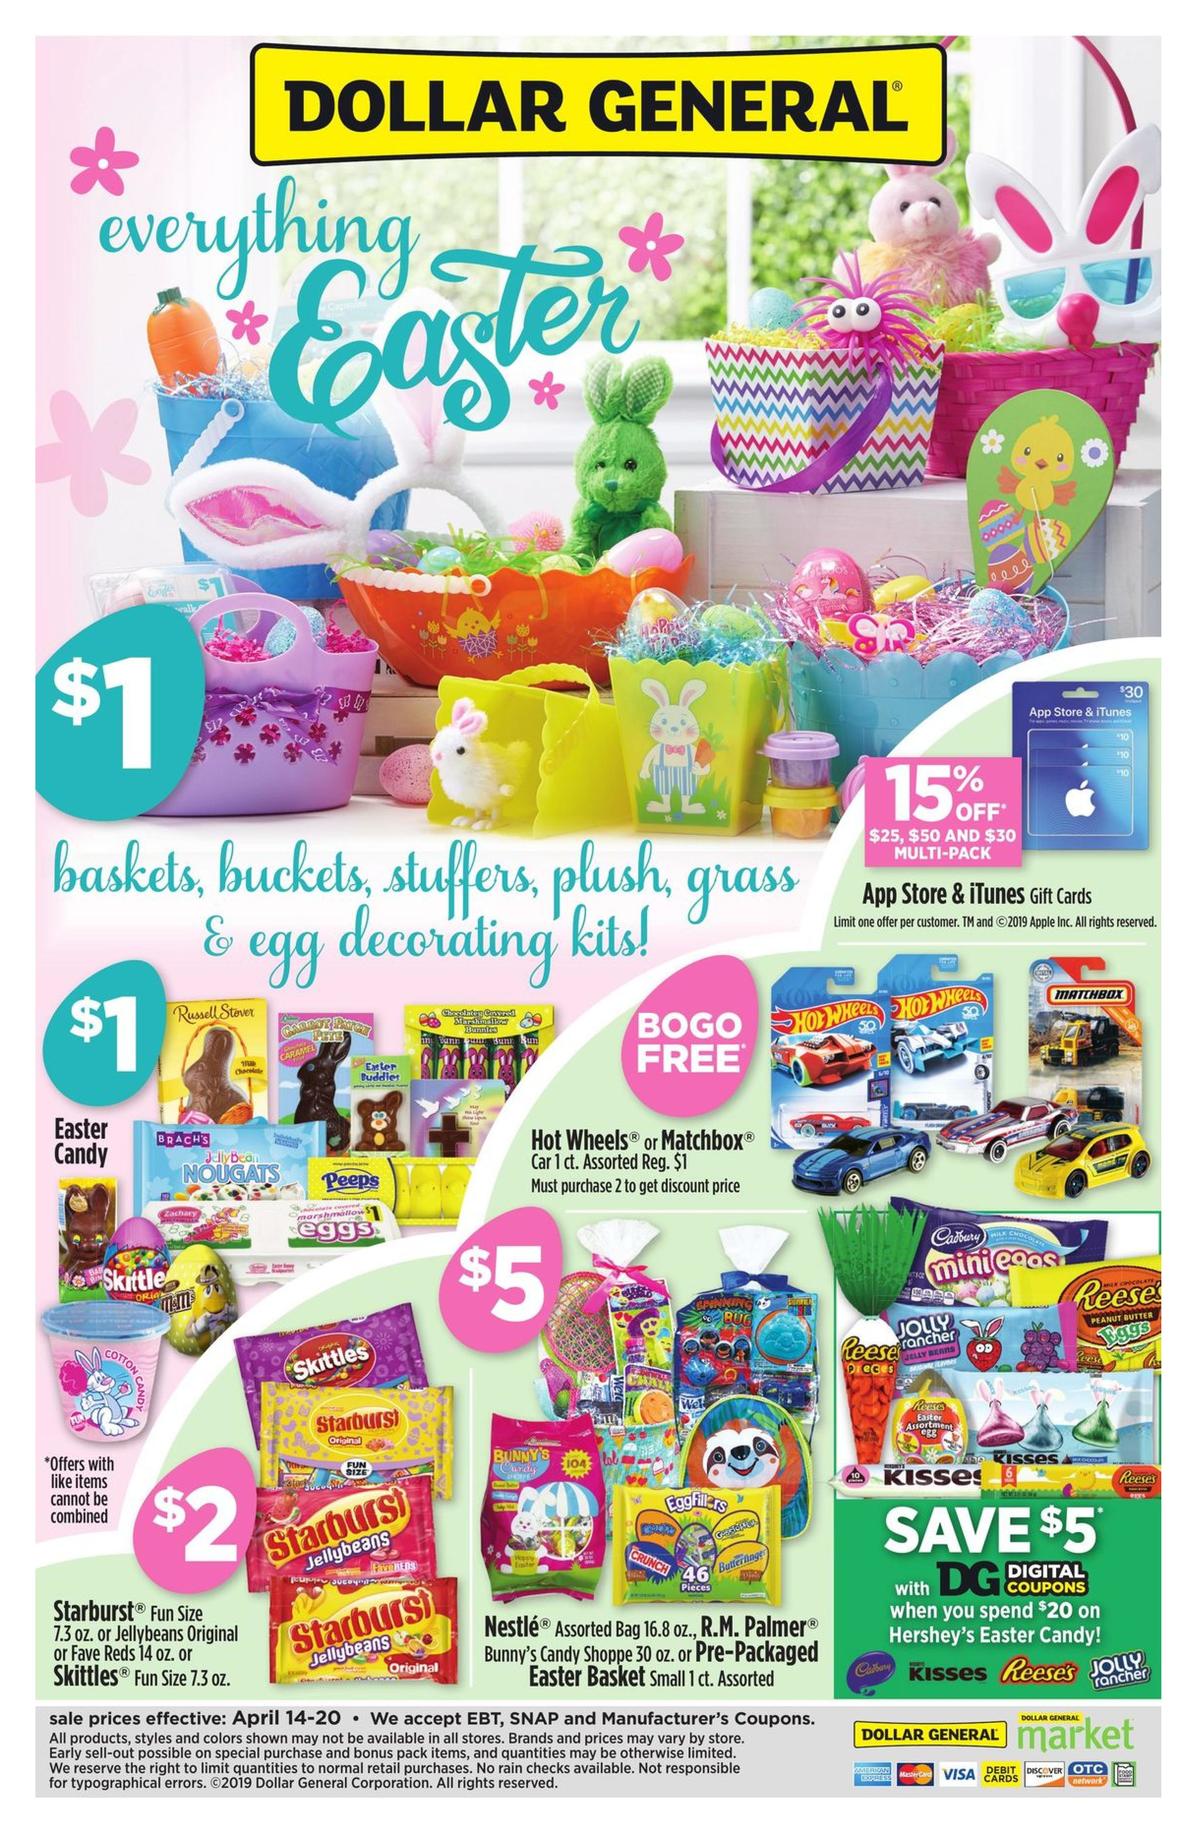 Dollar General Everything Easter for Less! Weekly Ad from April 14